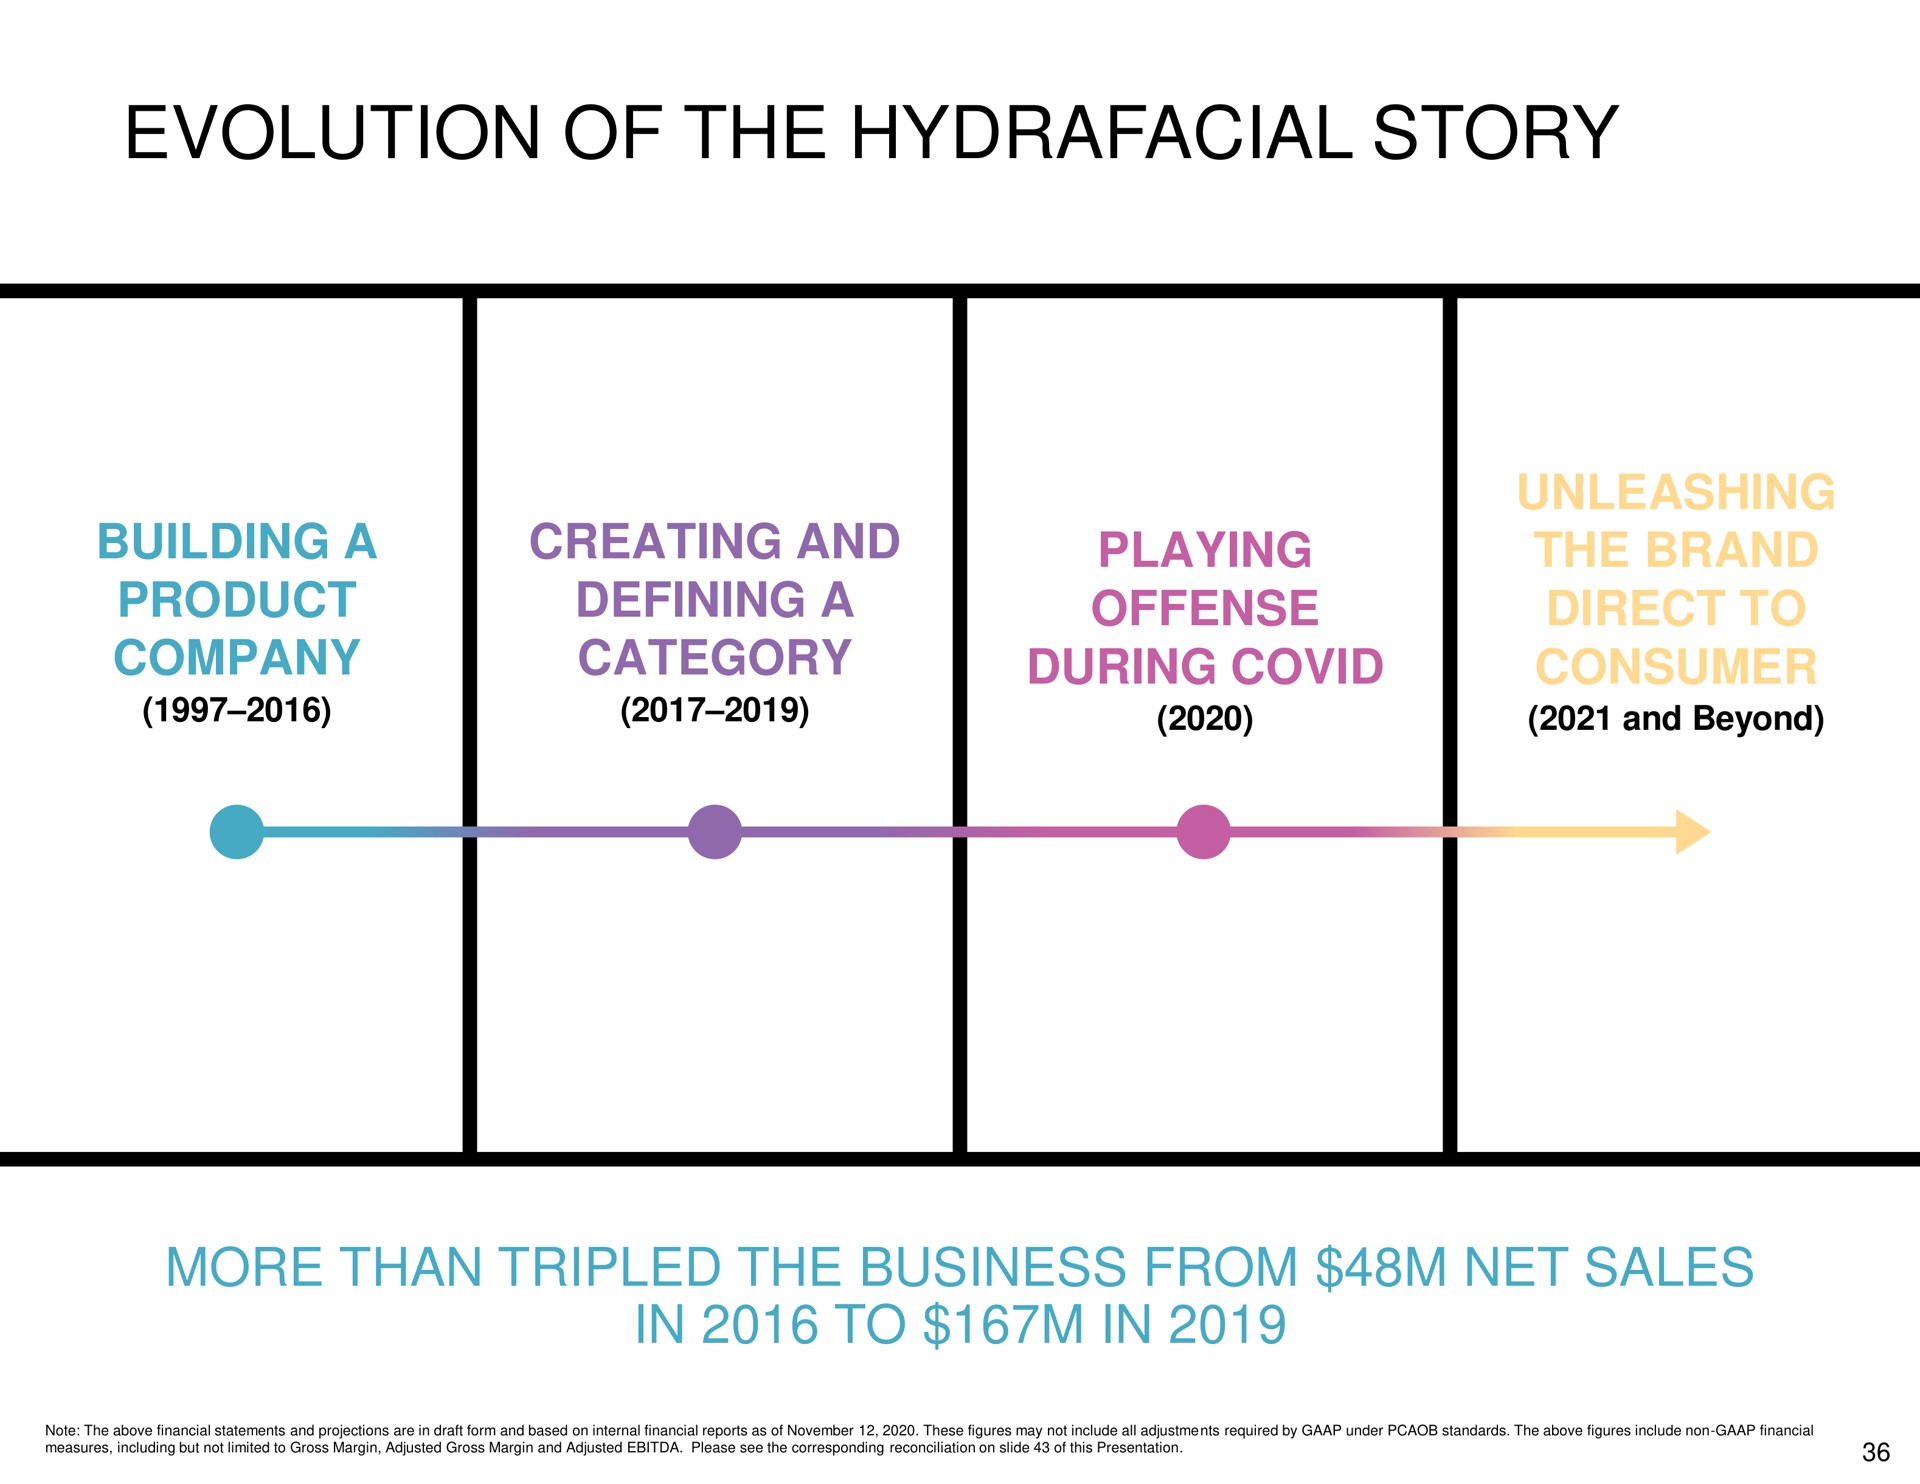 evolution of the story | Hydrafacial